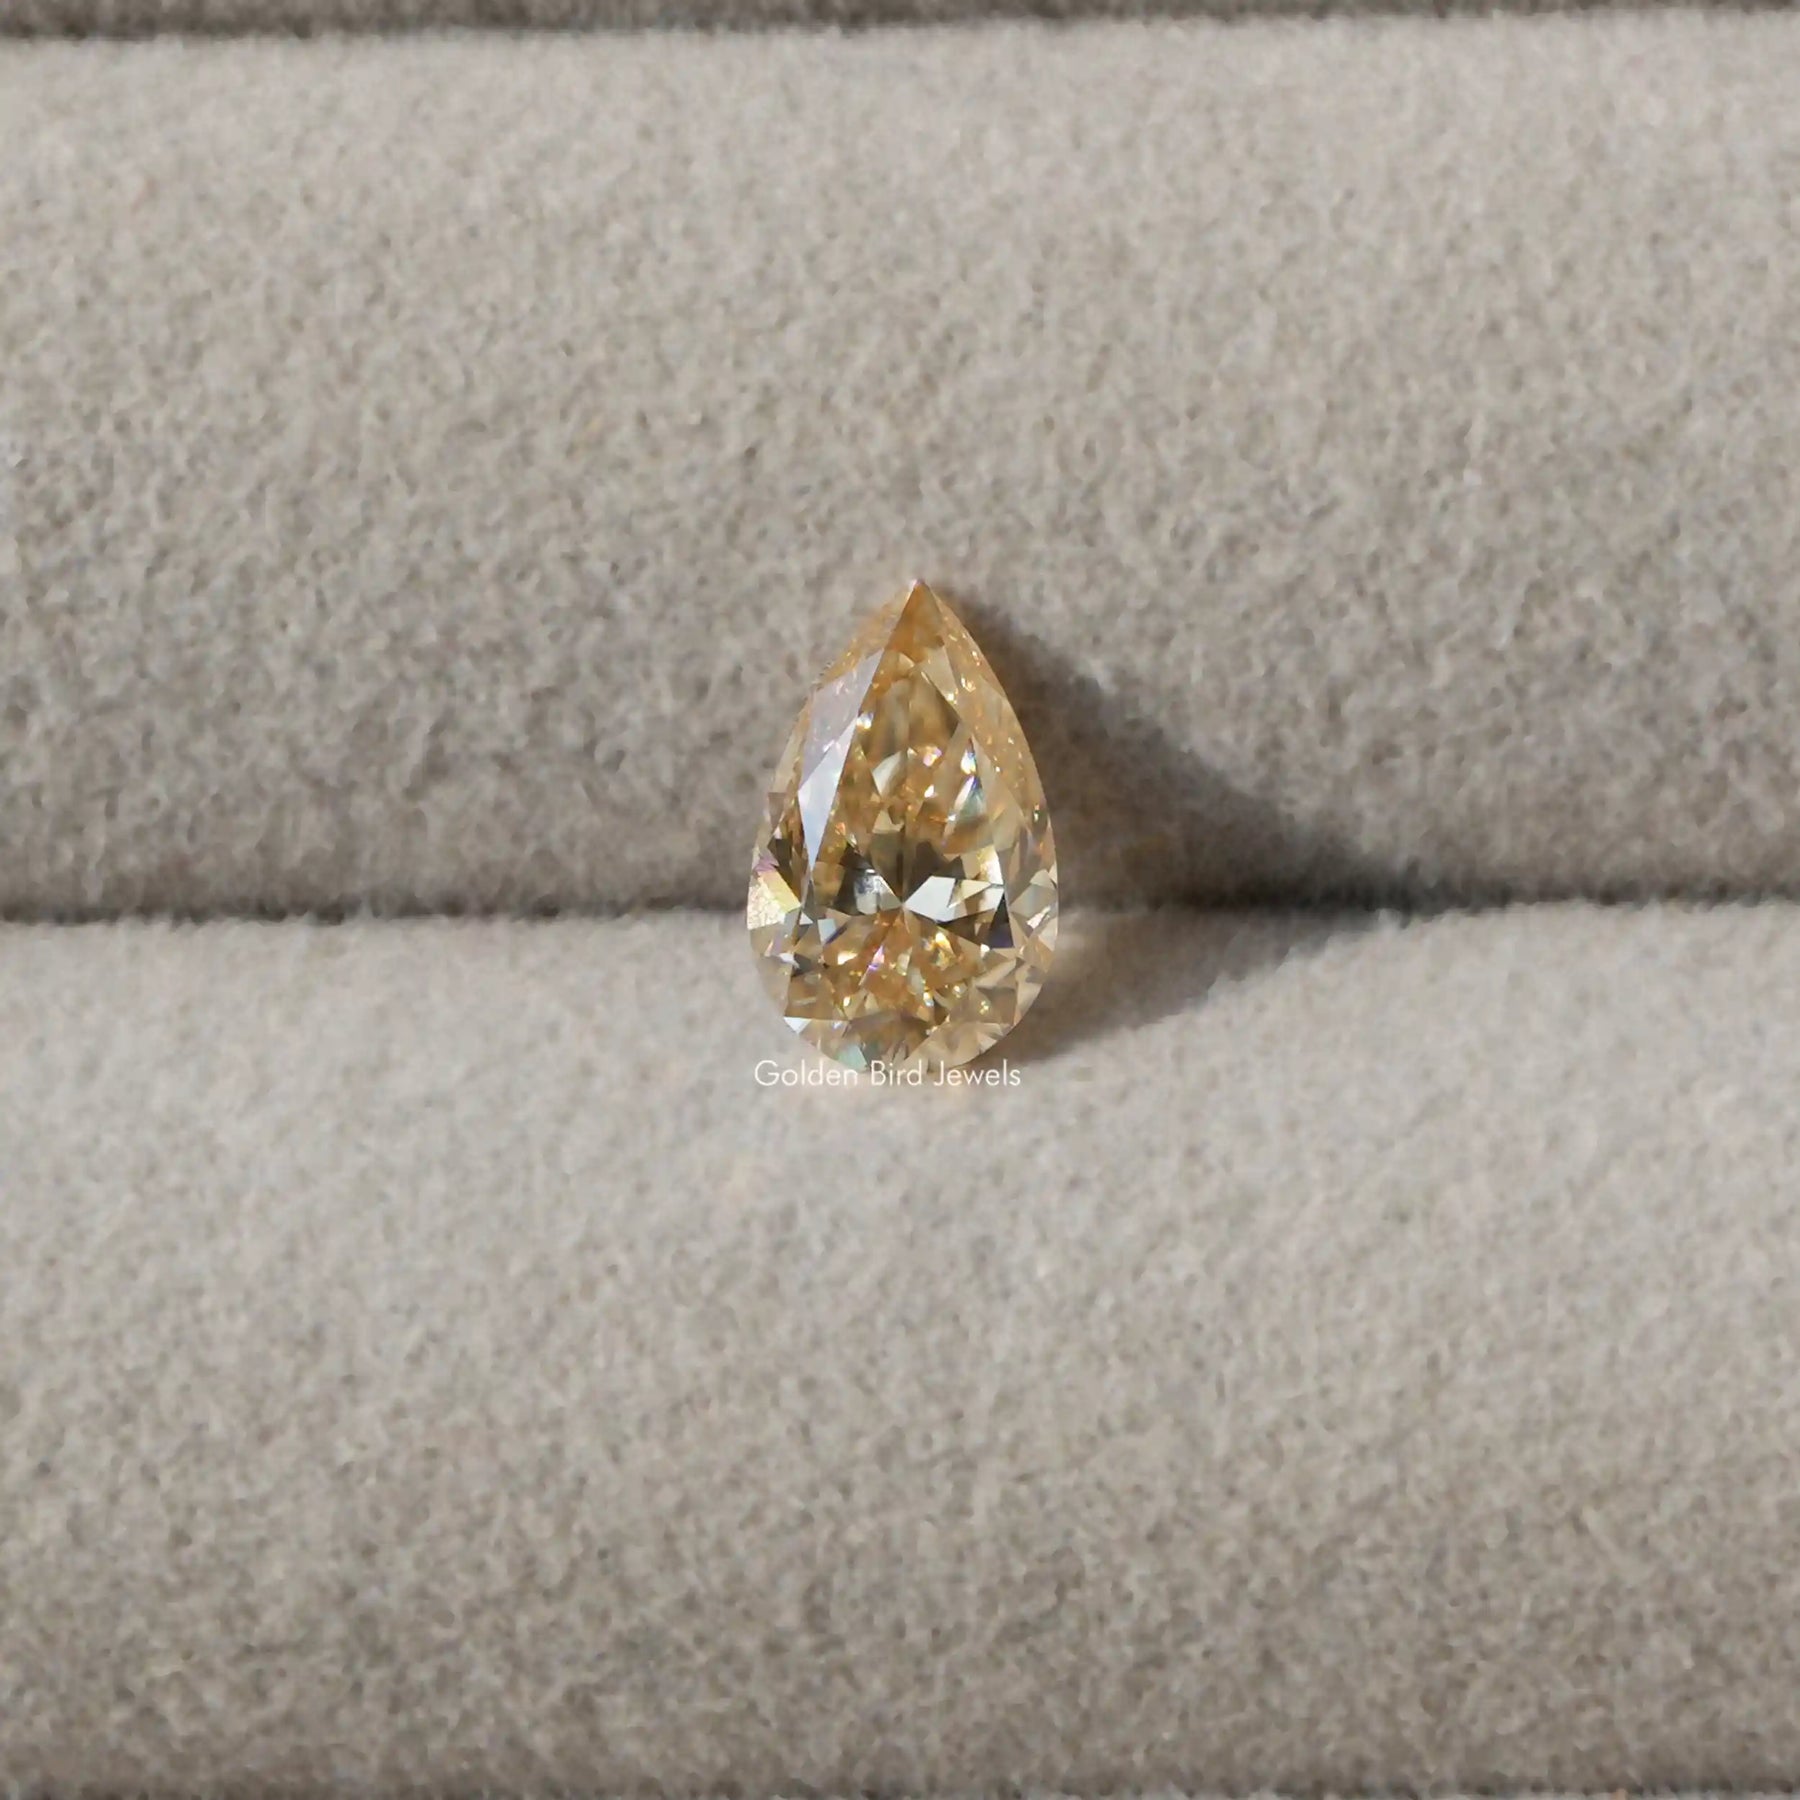 [Front view of champagne old mine pear cut loose stone]-[Golden Bird Jewels]